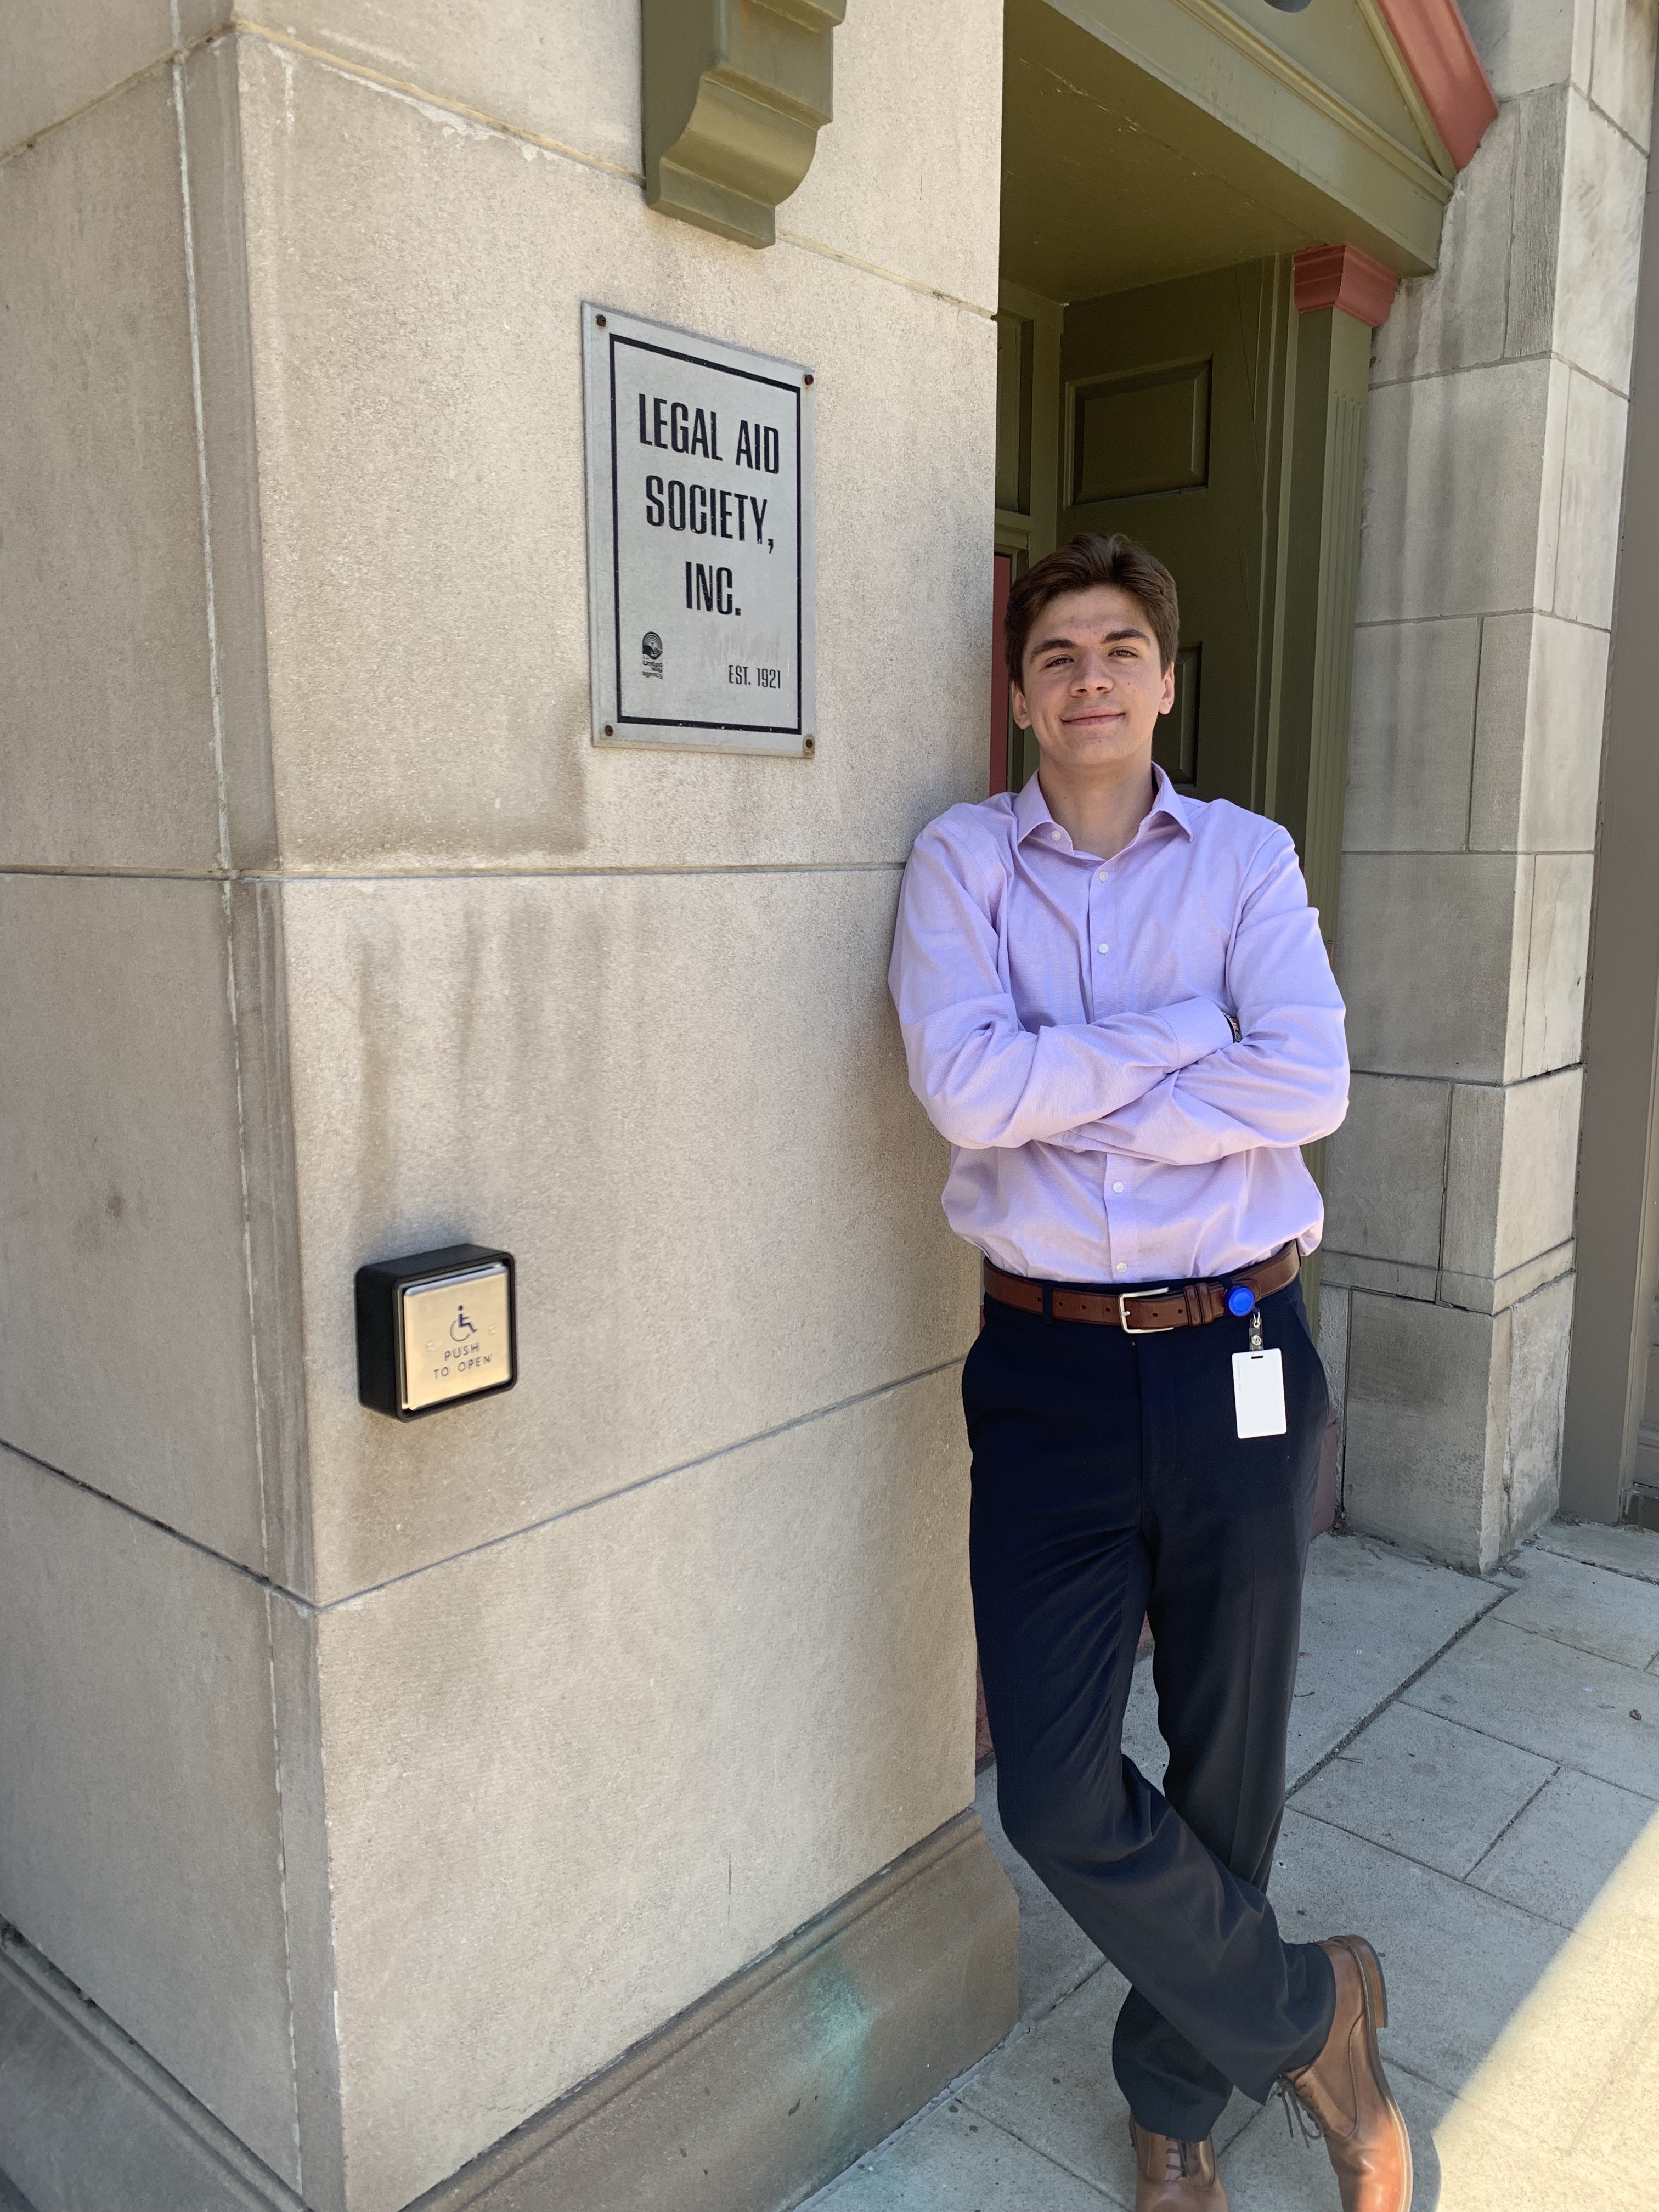 Jackson Grabill ’24 is member of the pre-law society, Sigma Chi fraternity, and plays on the soccer team. He is also involved with the Writing Center, Wabash Democracy and Public Discourse (WDPD) initiative and participates in Moot Court.